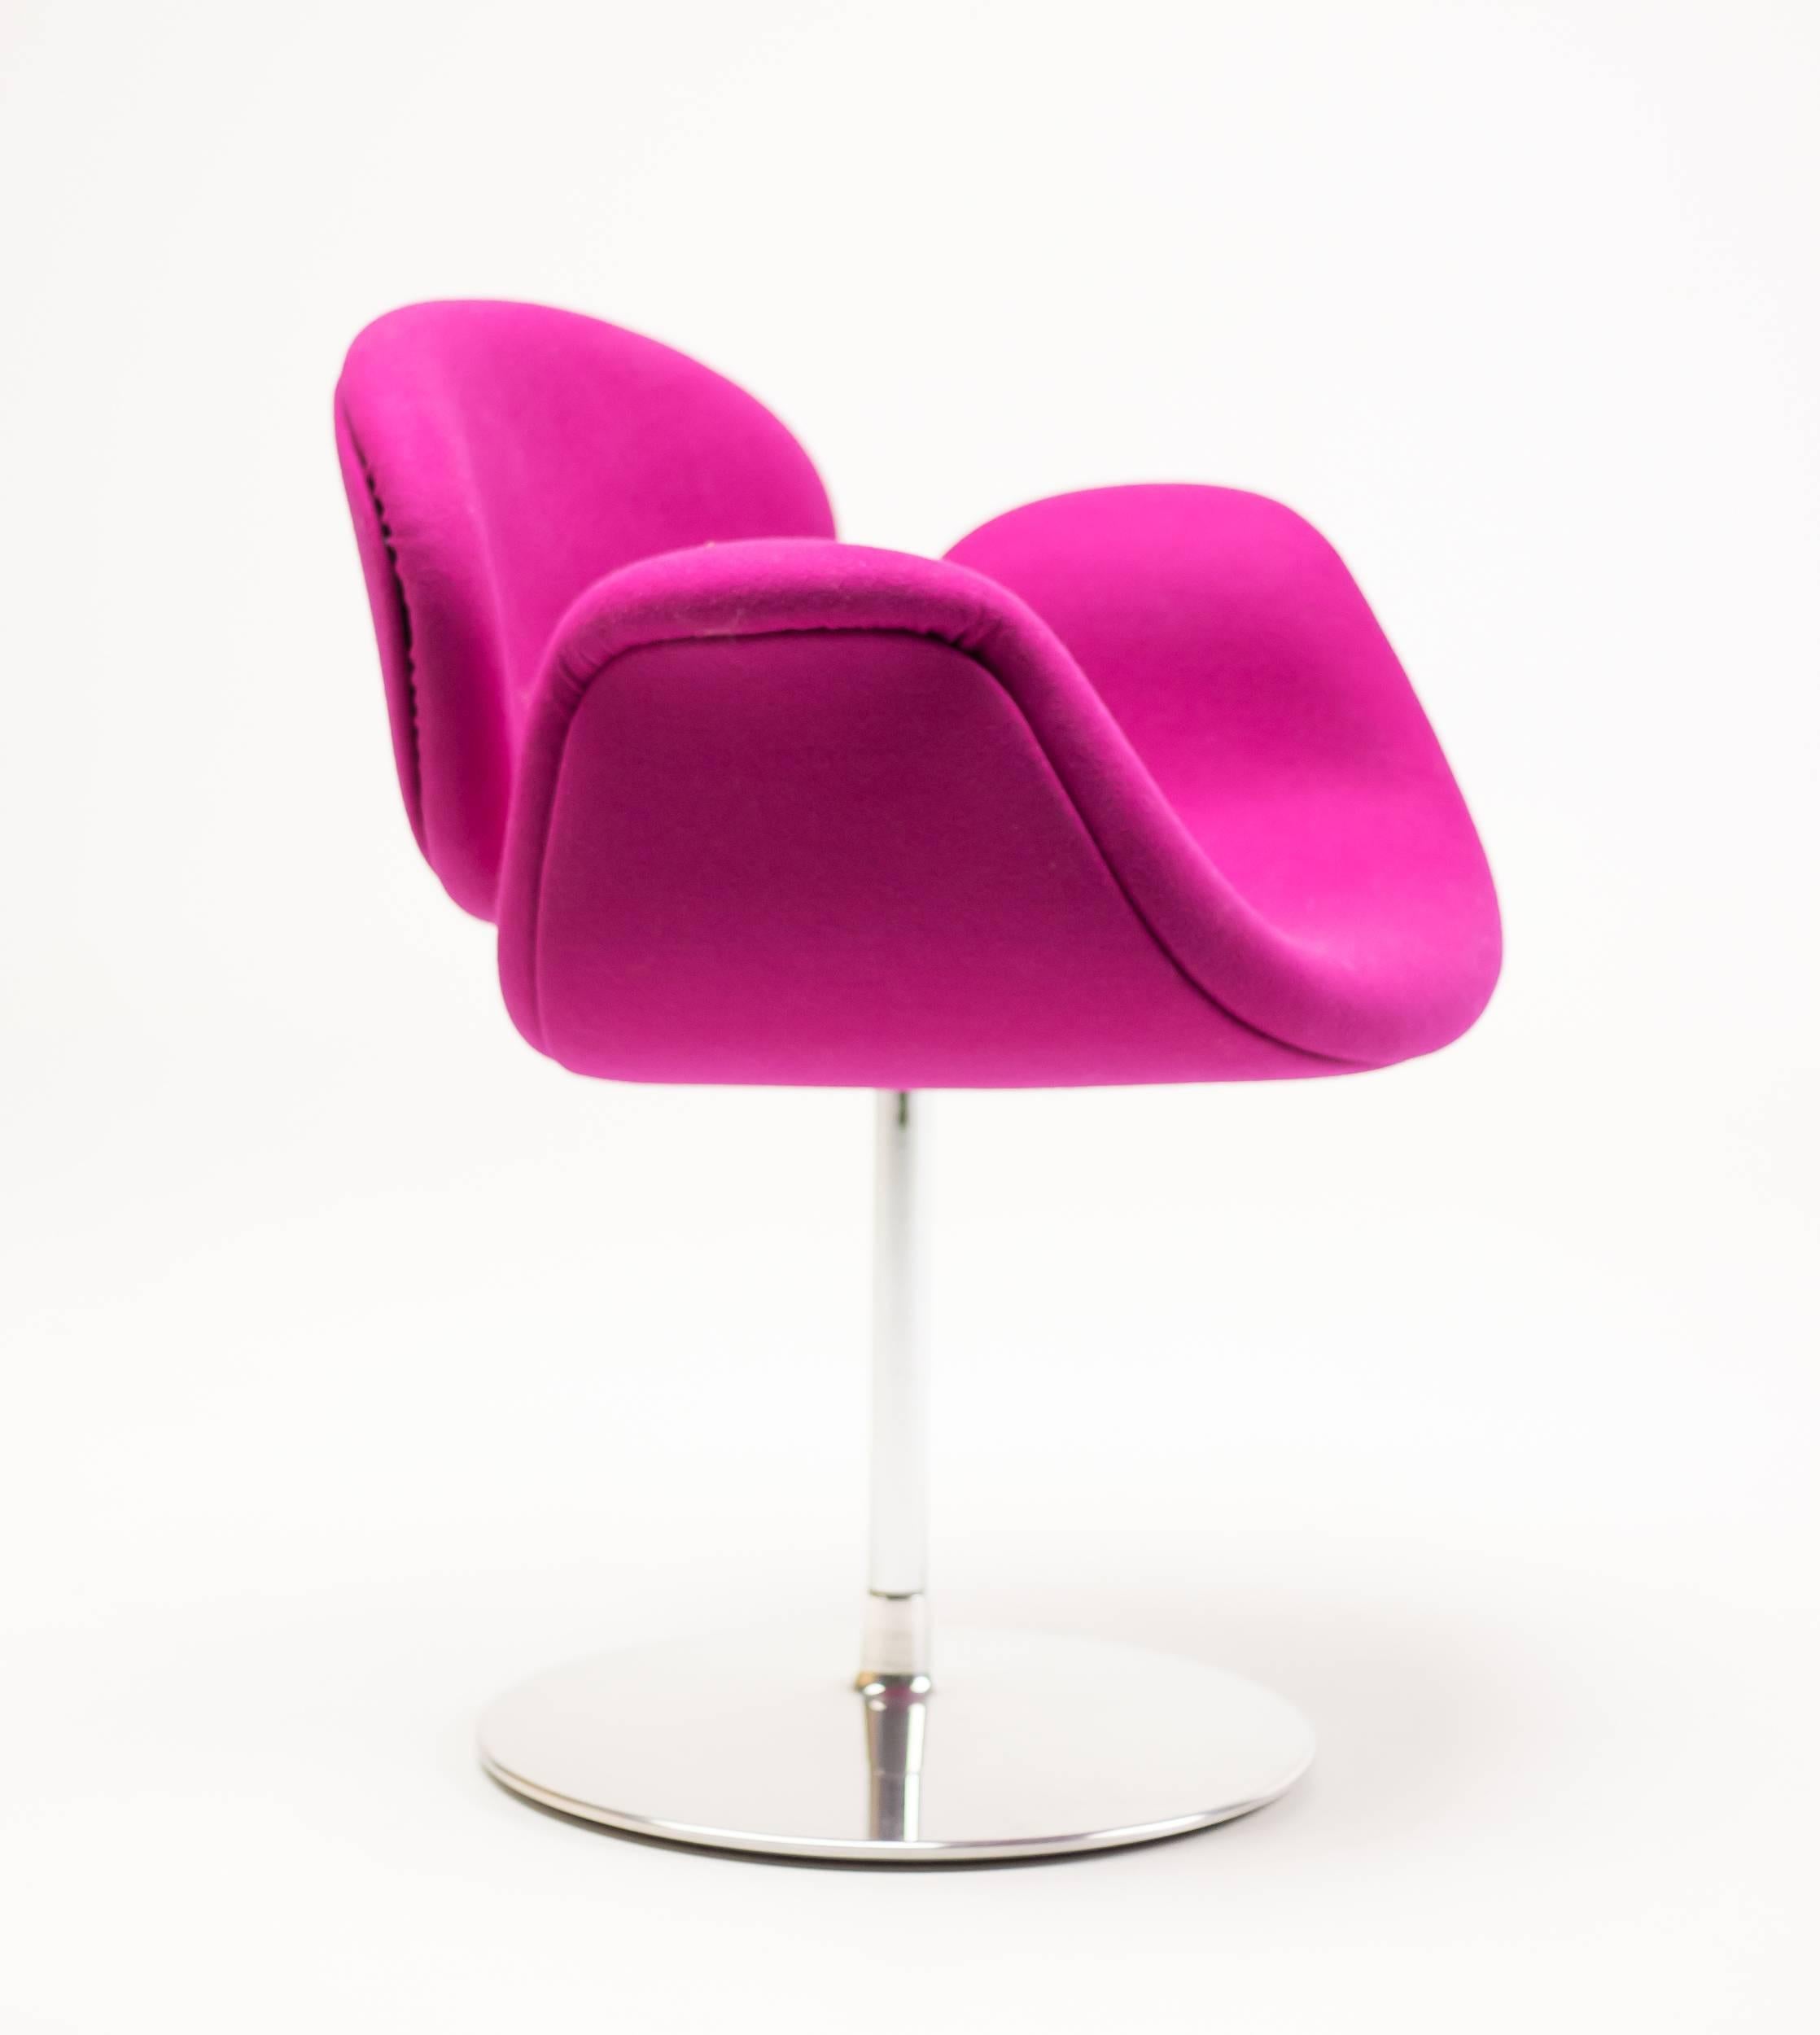 Designed by Pierre Paulin in 1965, made in the Netherlands by Artifort.
Upholstered in Kvadrat 90% wool magenta fabric, chrome swivel base.

 

